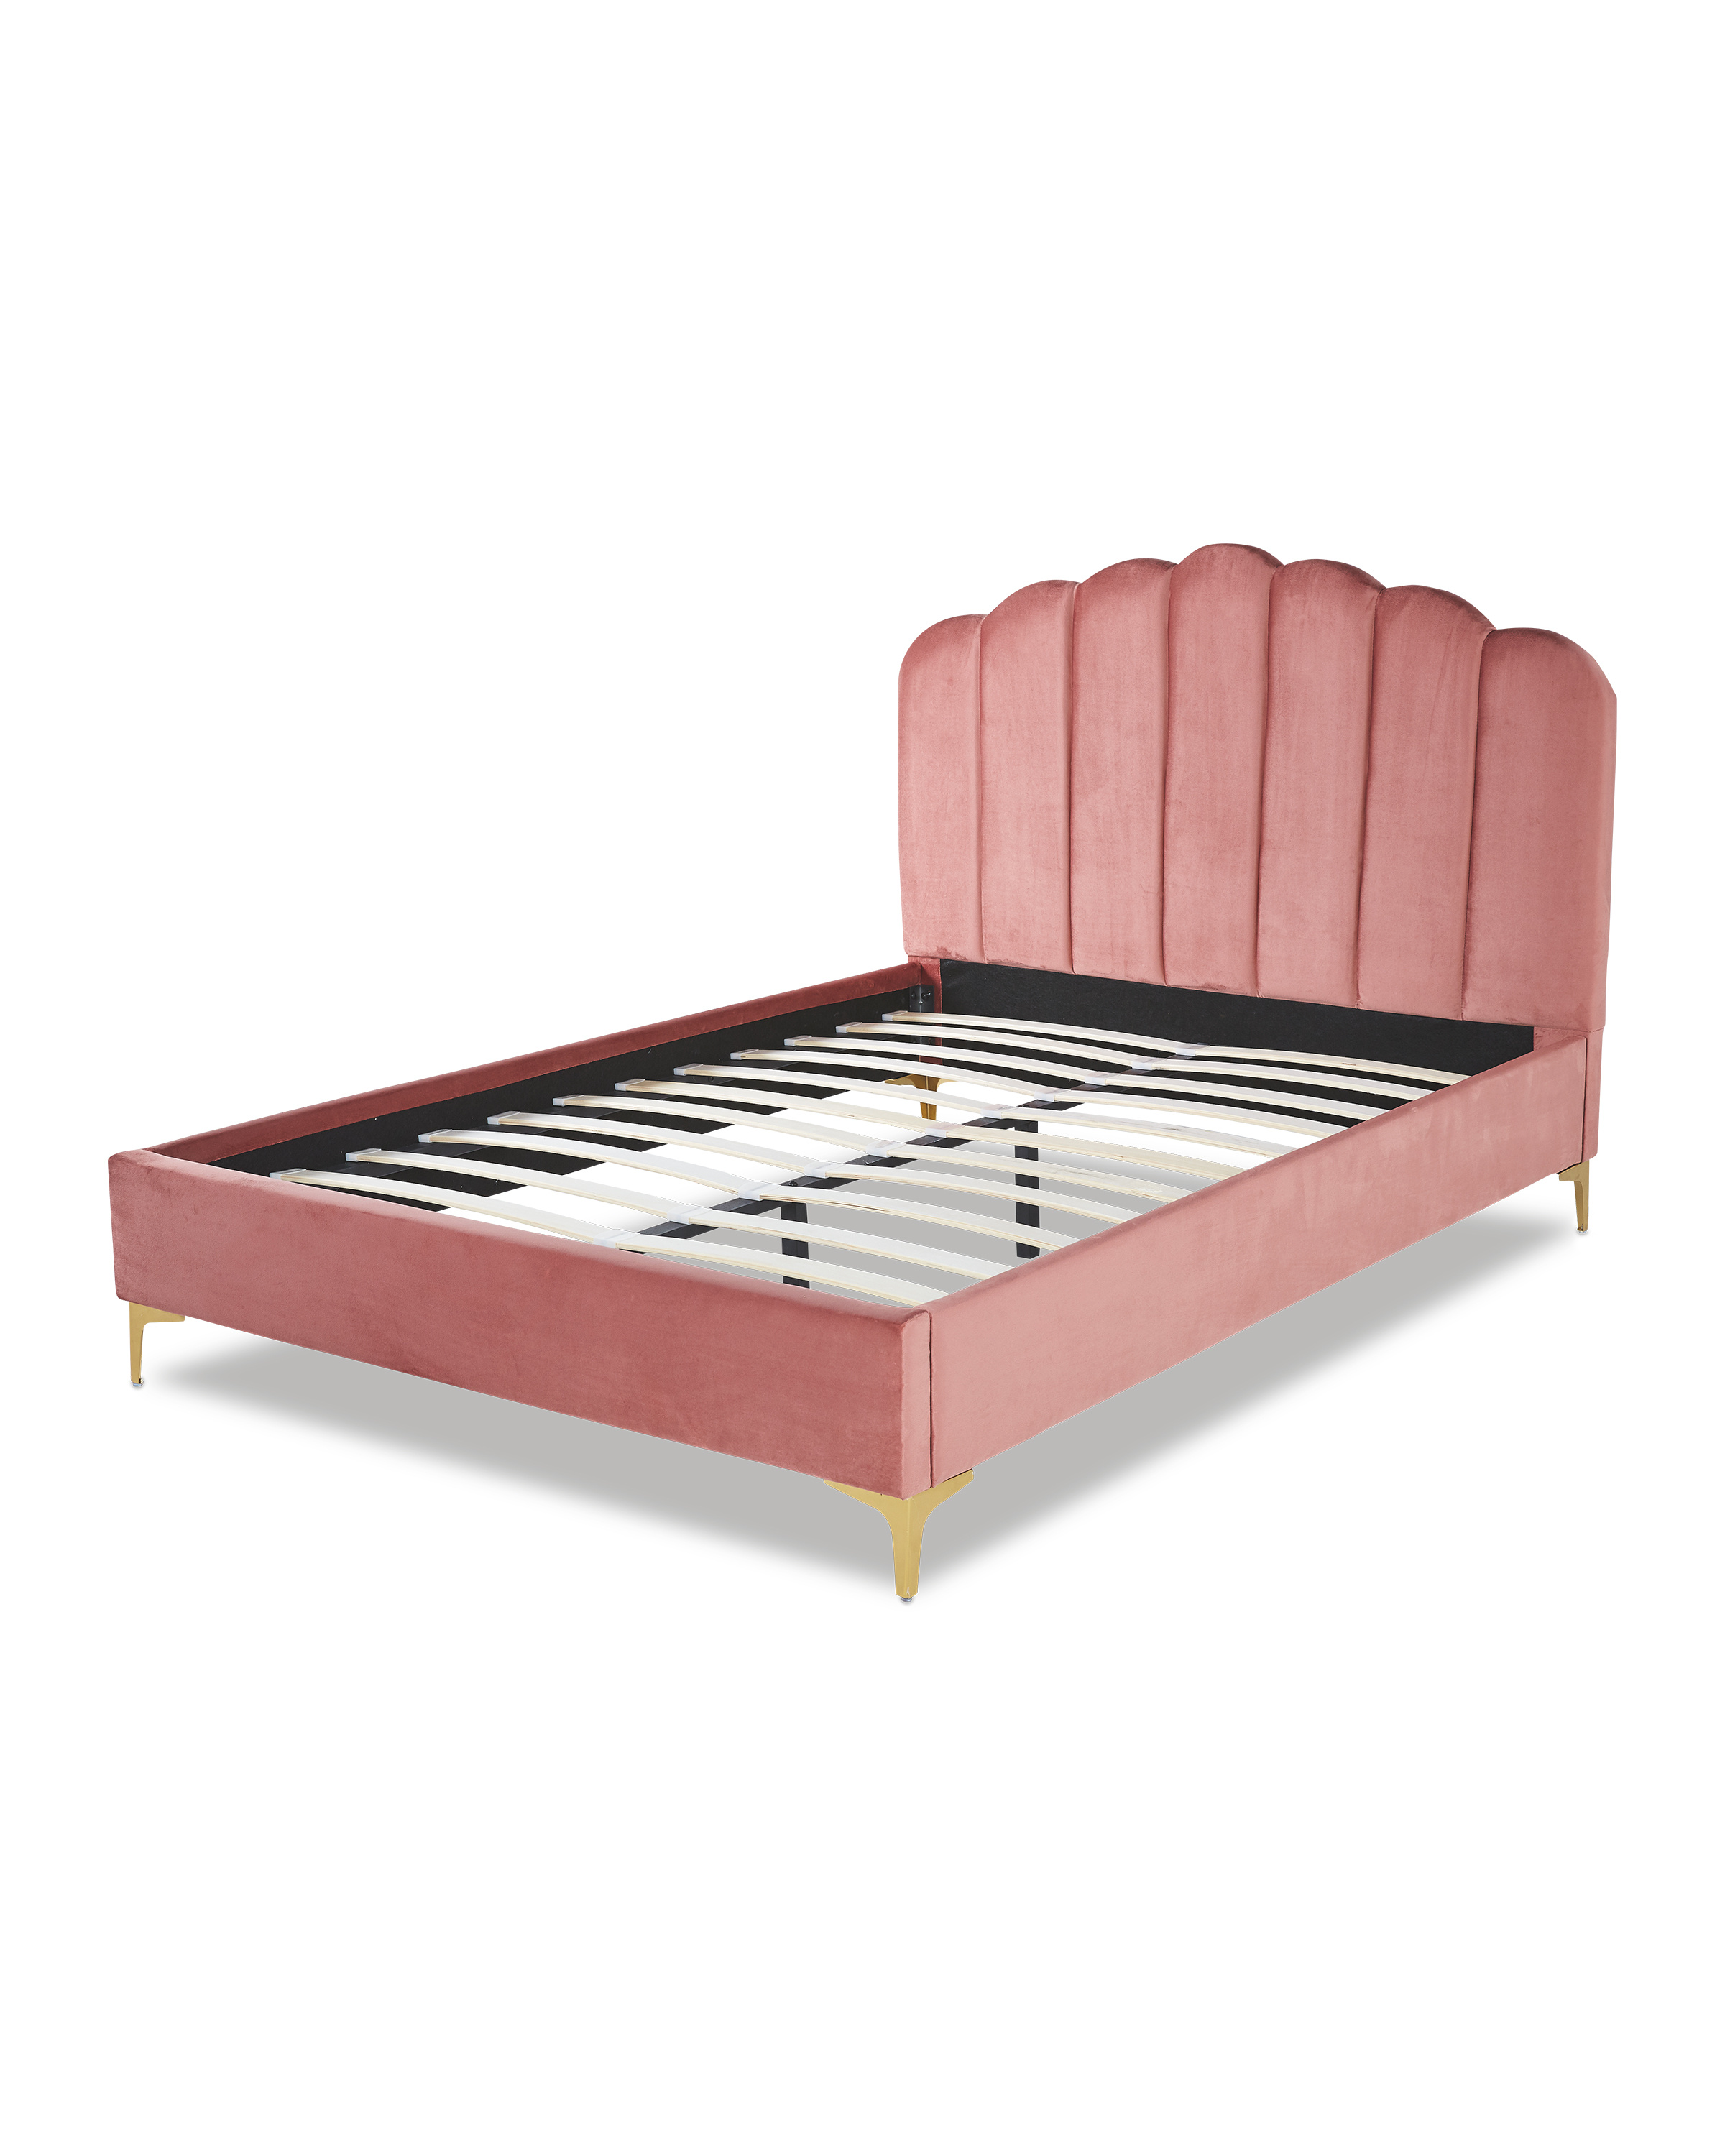 Pink King Size Scalloped Bed Aldi Uk, Pink King Size Bed